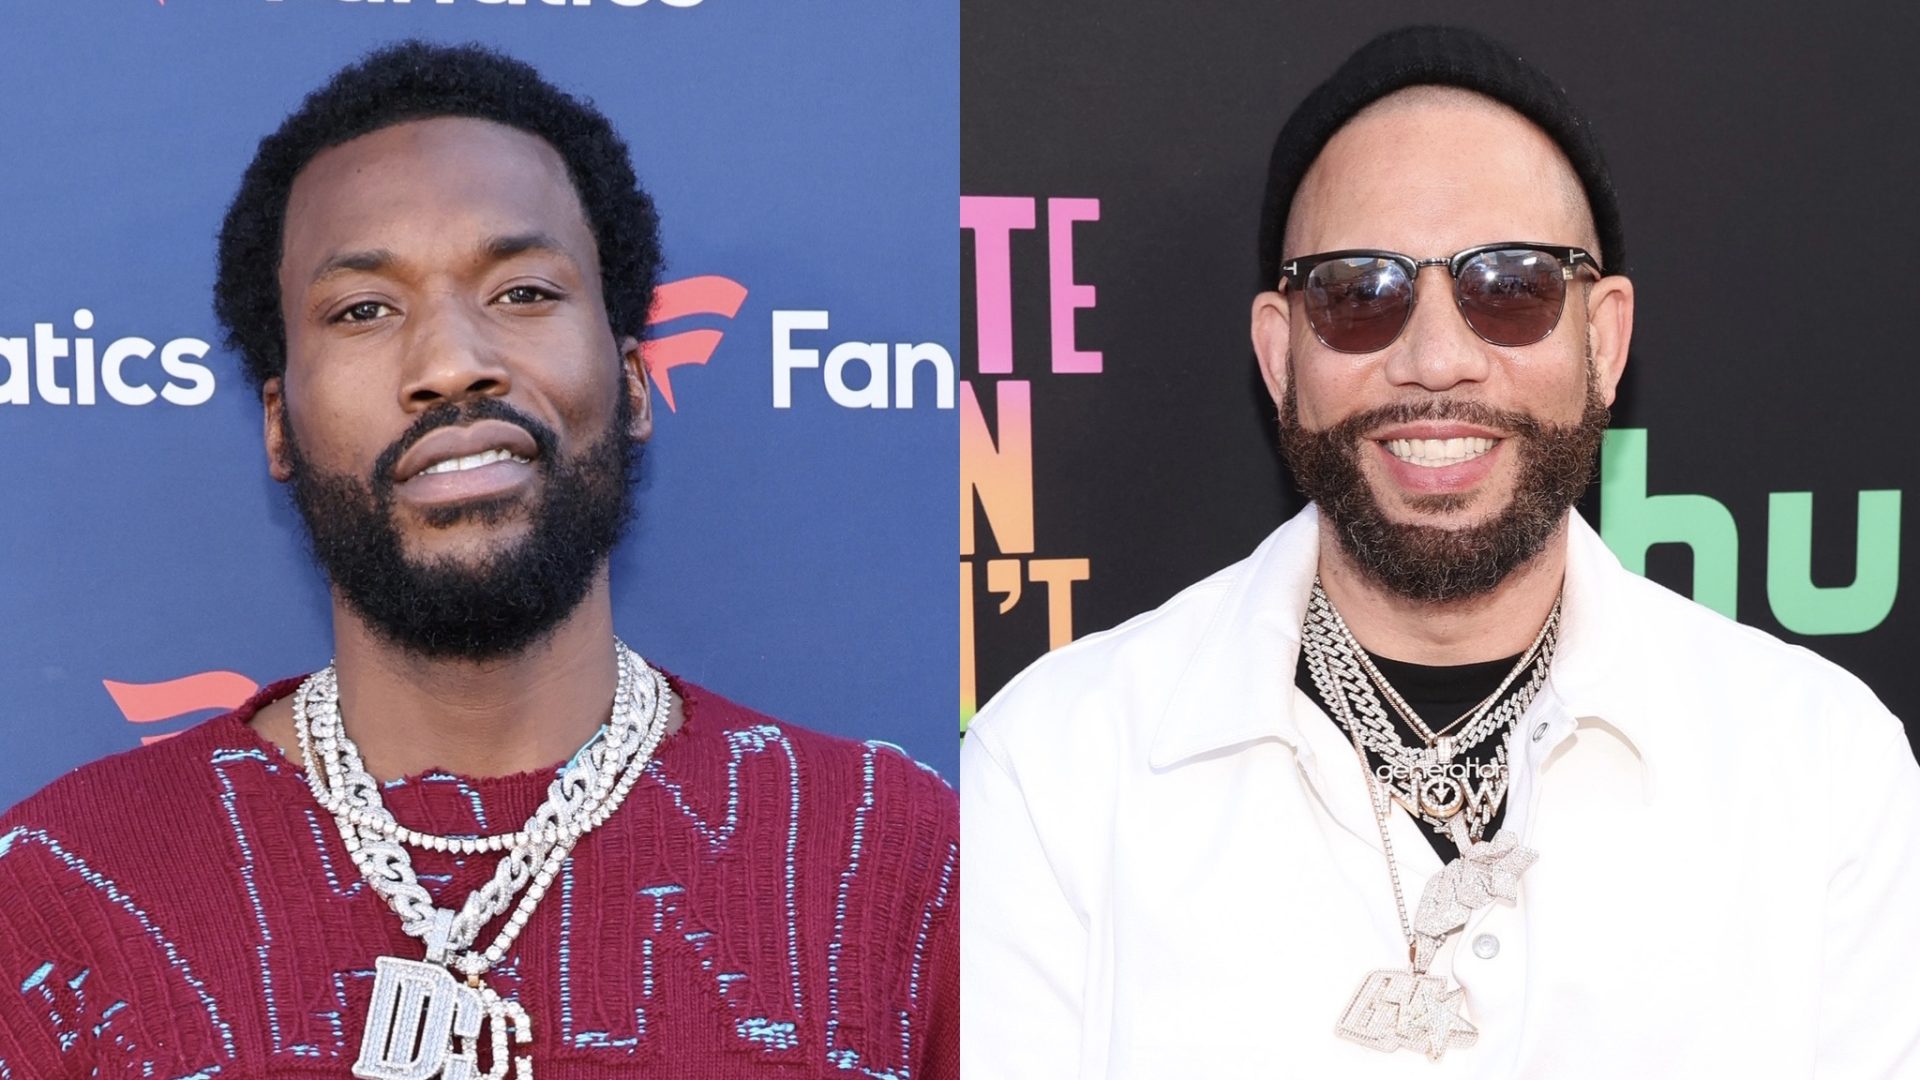 Meek Mill Blasts DJ Drama For 'Always Speaking Down' On Him: 'Ion Rock Wit These Goofies'